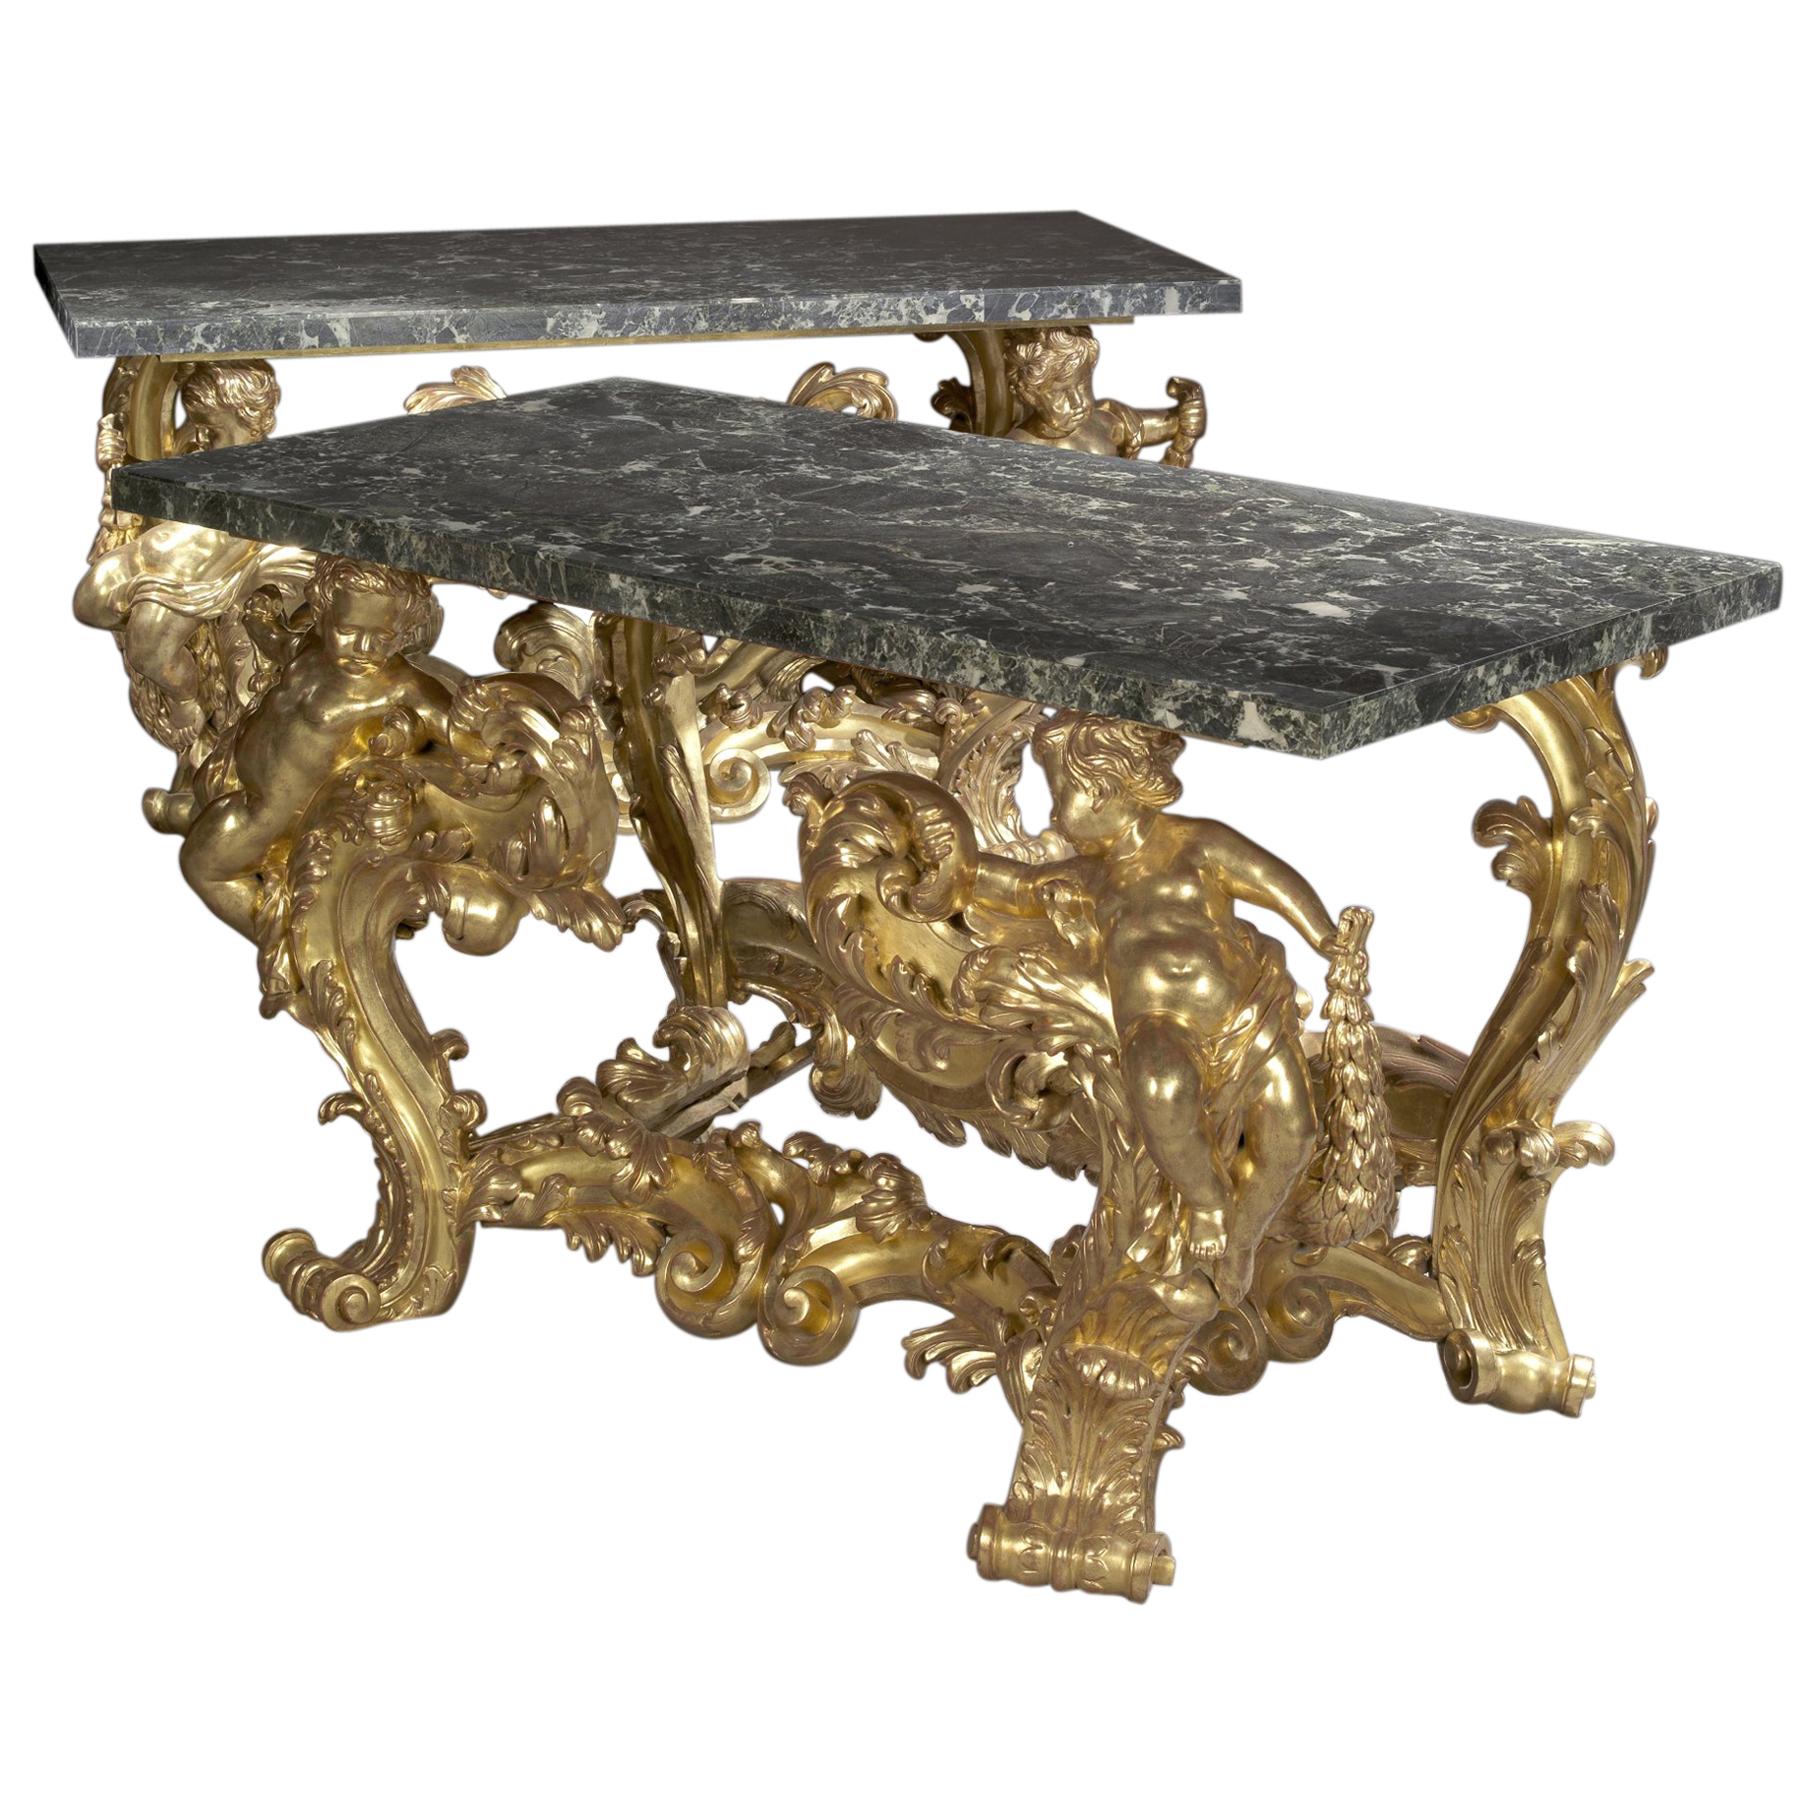 Pair of Palatial Giltwood Console Tables with Marble Tops, circa 1870